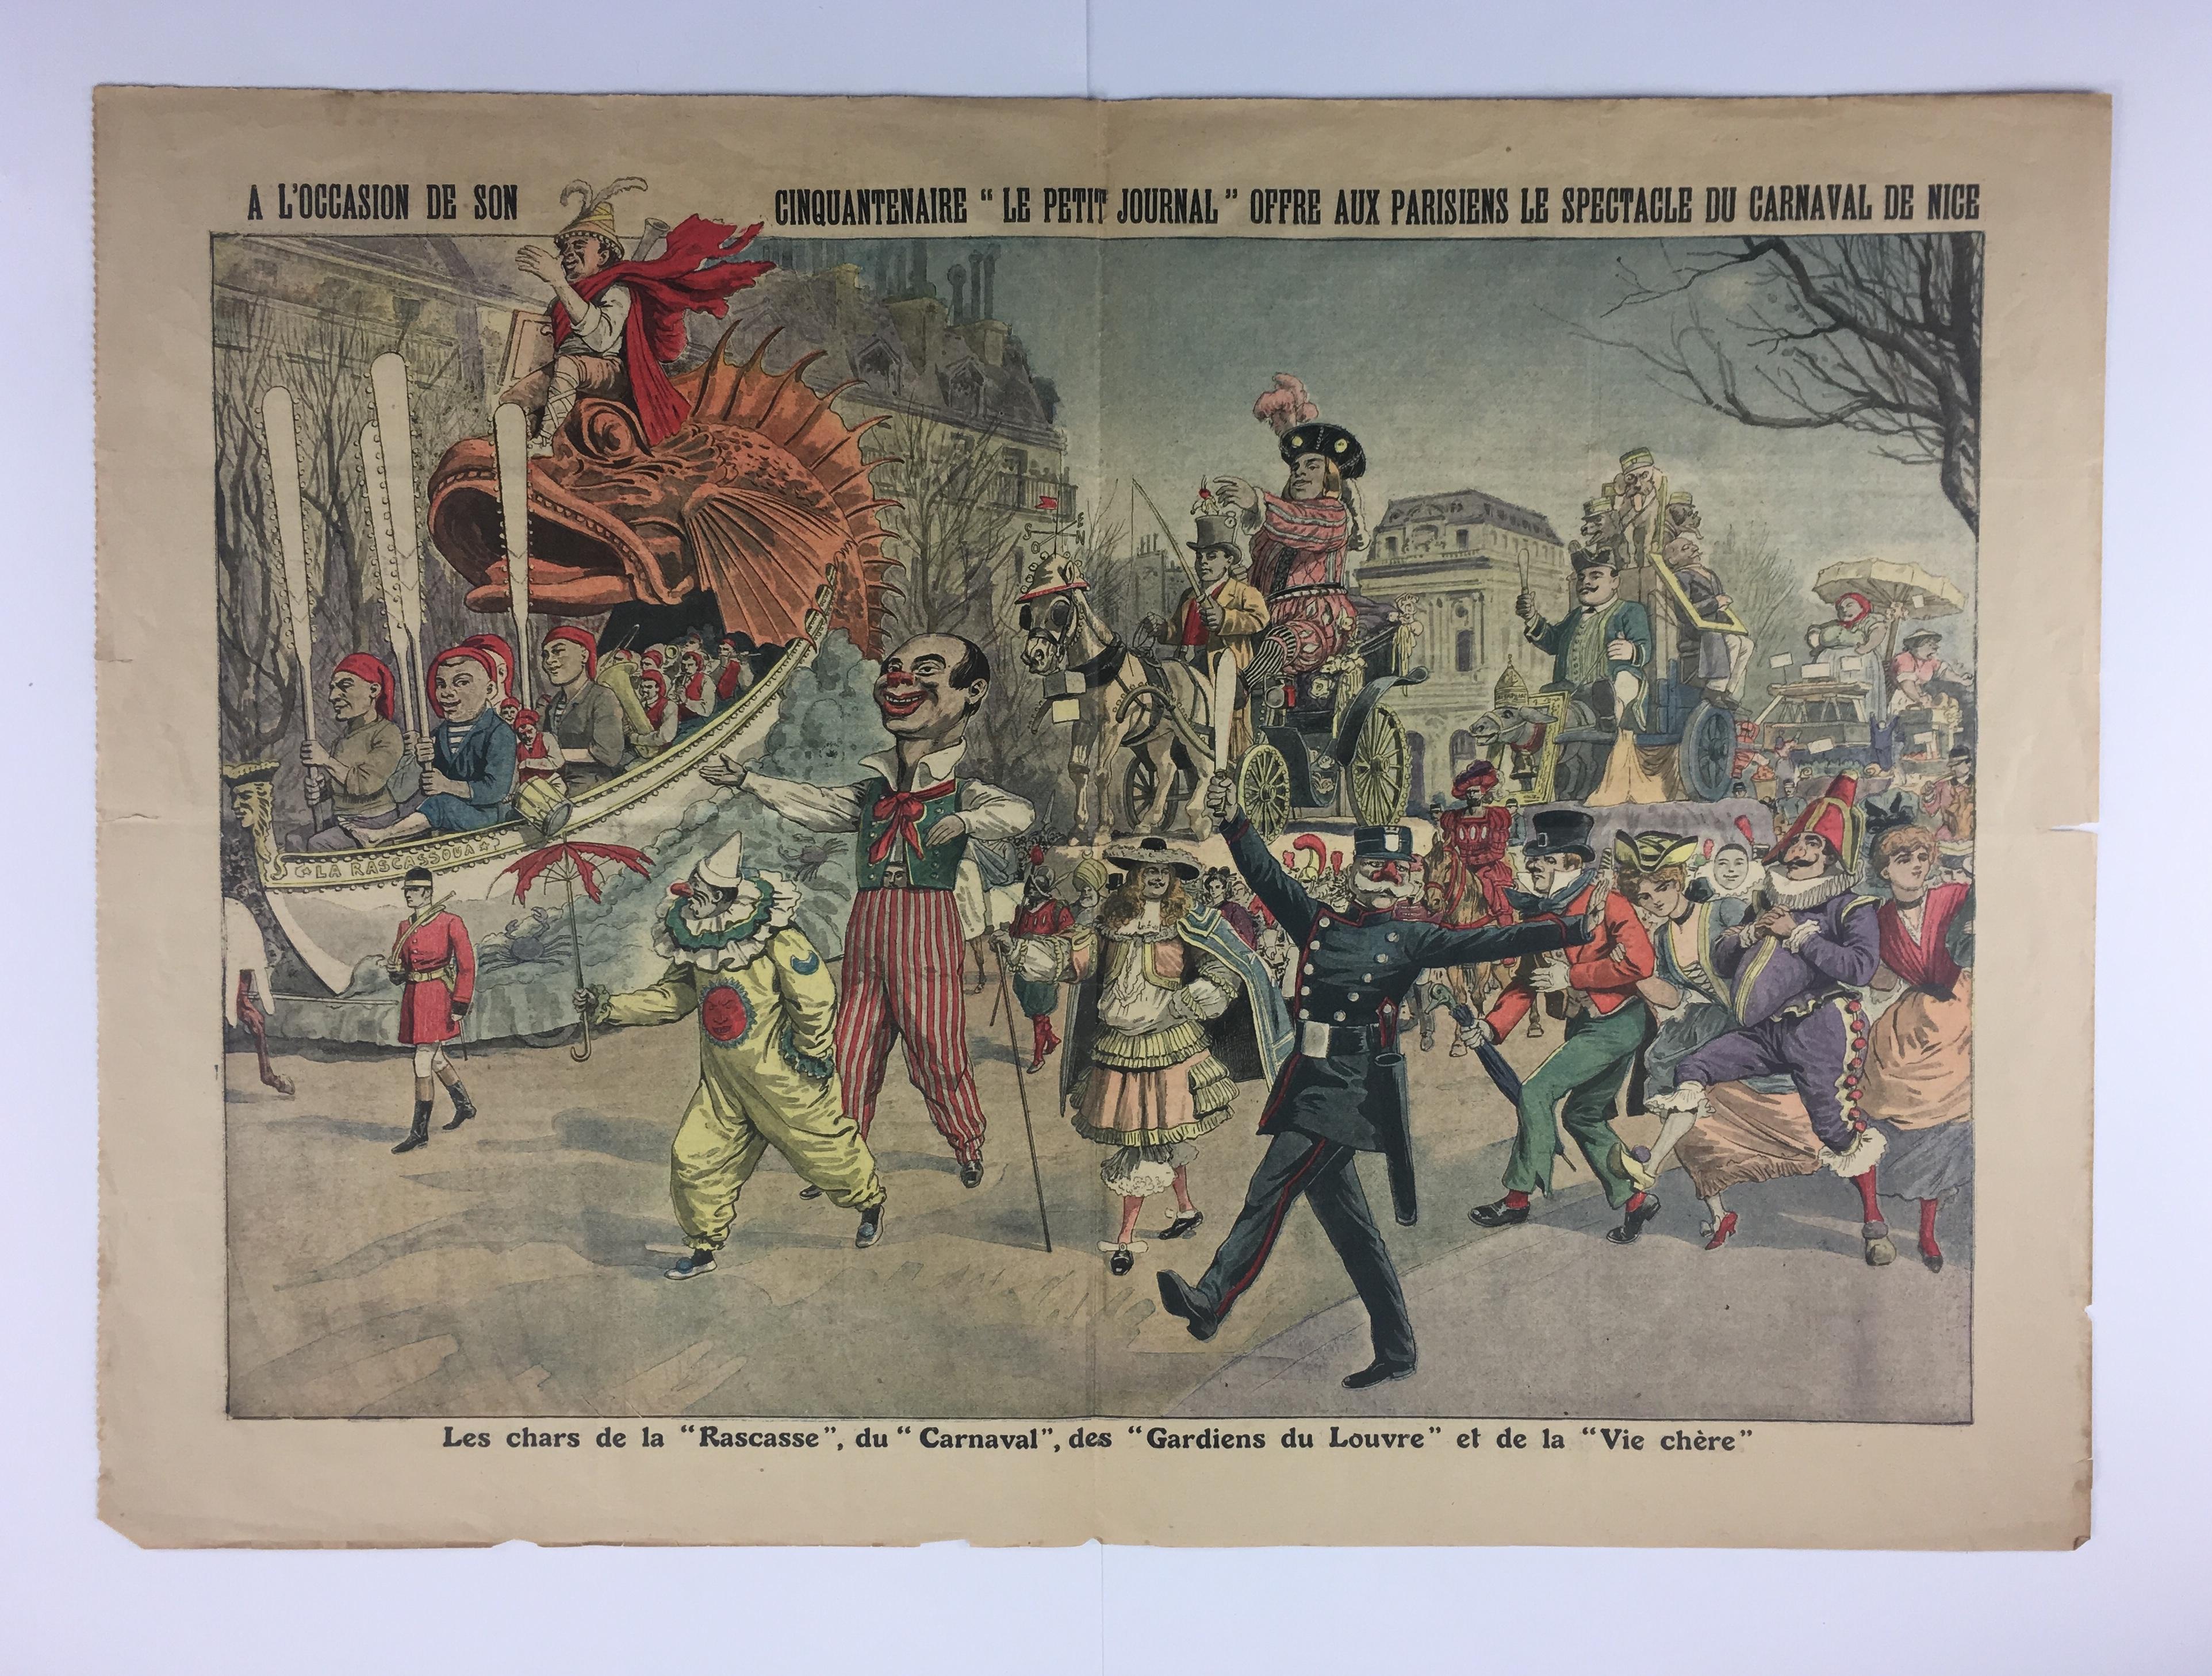 A historical piece of nostalgic journal art dated 1912, Carnival or Carnaval de Nice, France from Le Petit Journal. Two years prior to the First World War this remarkable journal was printed.  
 
The colorful Carnival de Nice historical memorabilia